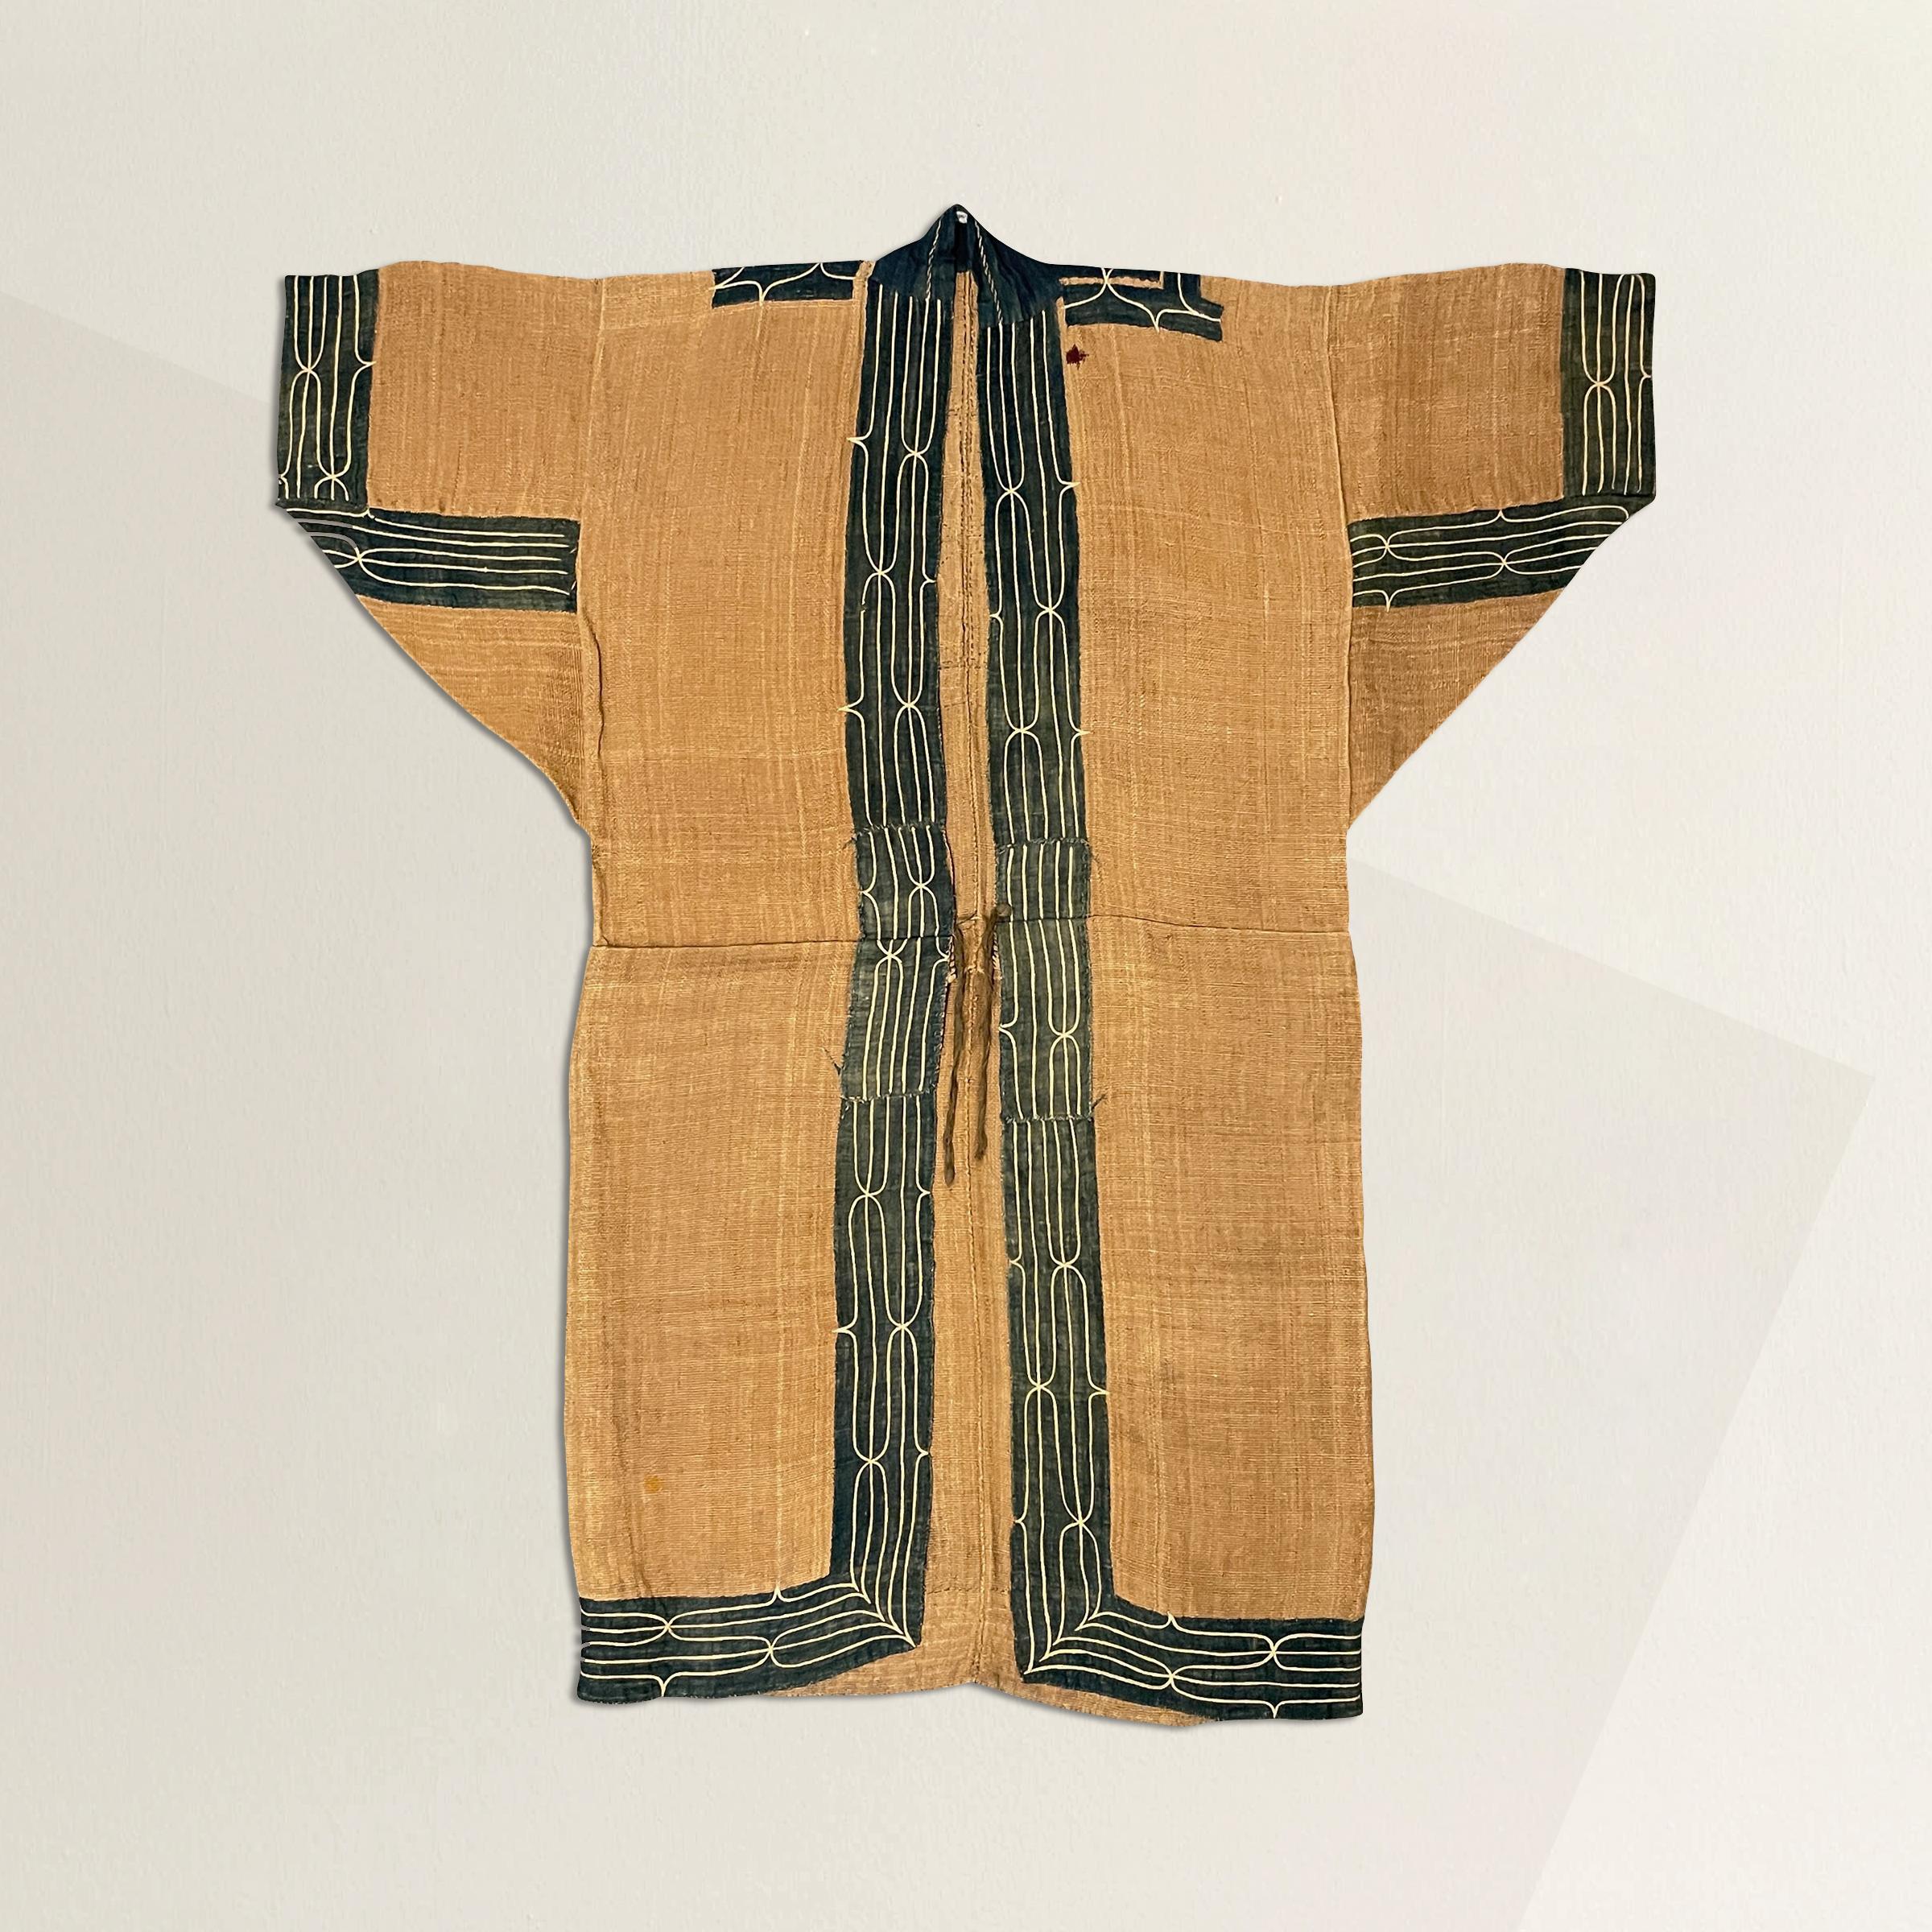 This 19th-century Ainu Attus (bark fiber) robe is a remarkable testament to the cultural heritage and resilience of the Ainu people. Crafted with meticulous care, it stands as an exceedingly rare and exceptional piece of Ainu craftsmanship. The